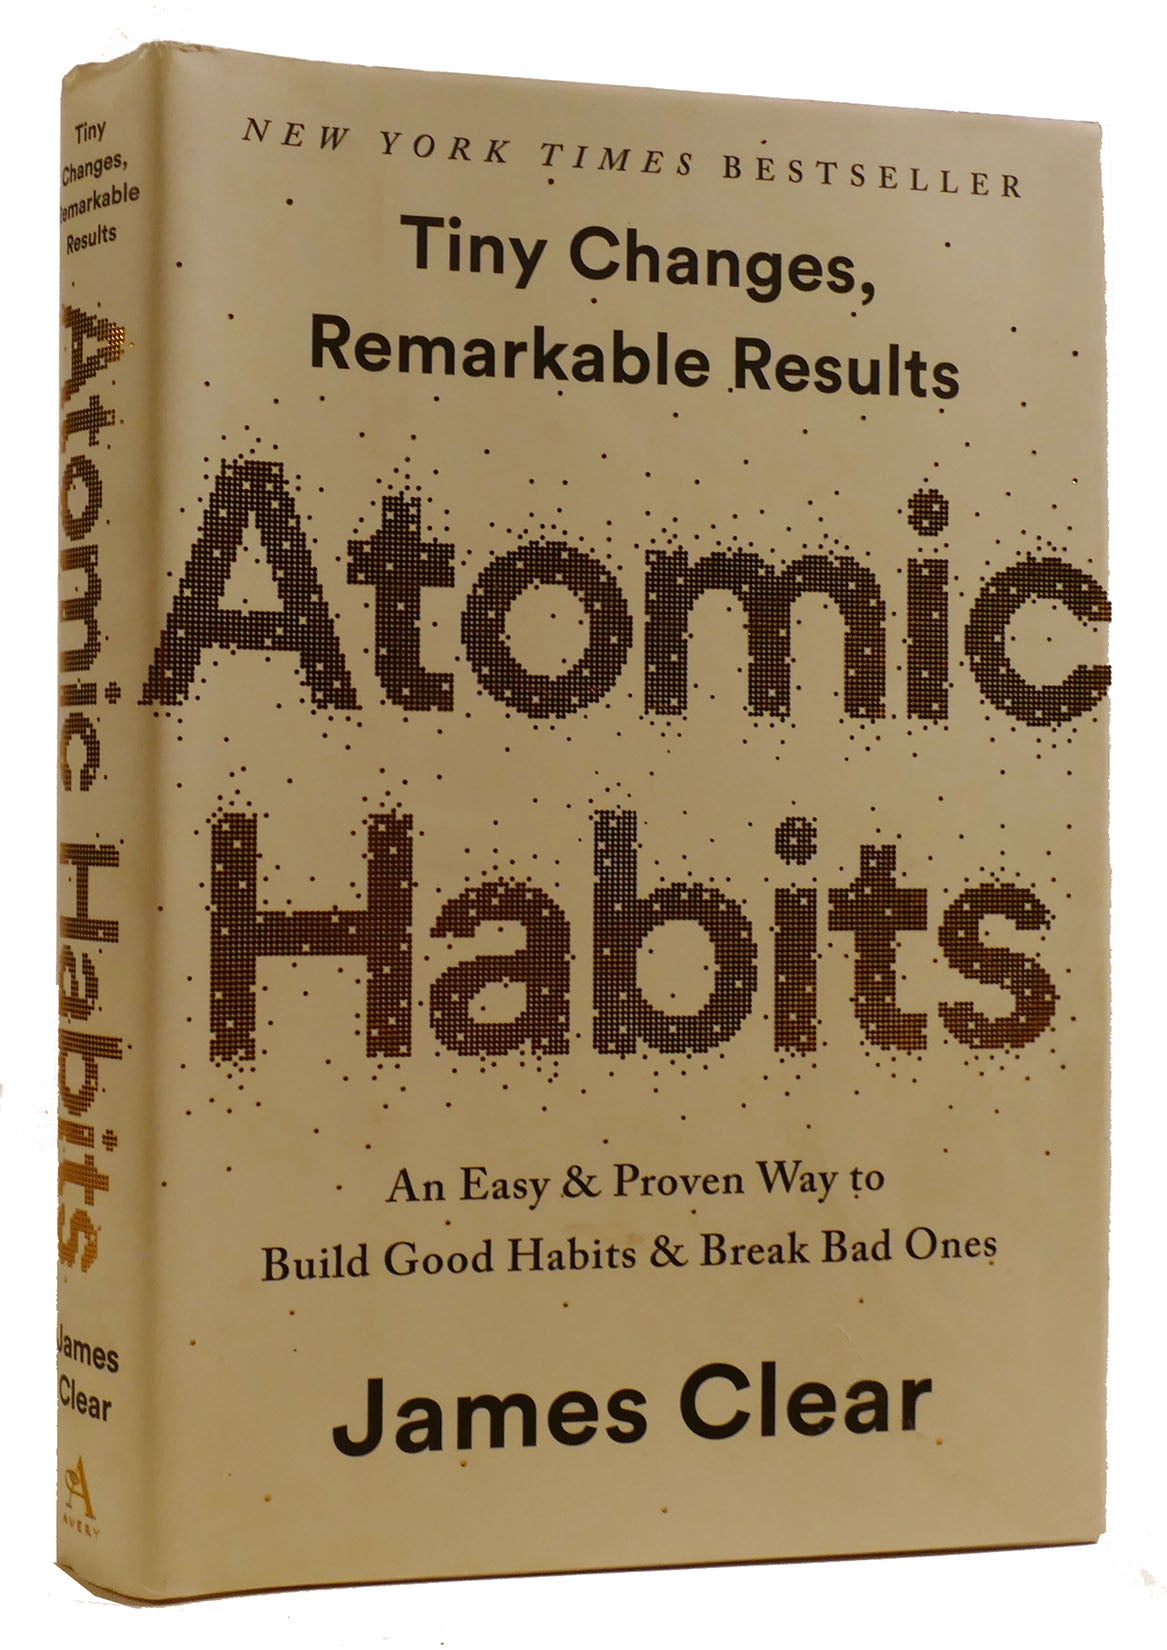  [By James Clear ] Atomic Habits (Paperback)【2018】by James Clear  (Author) (Paperback) : unknown author: Office Products